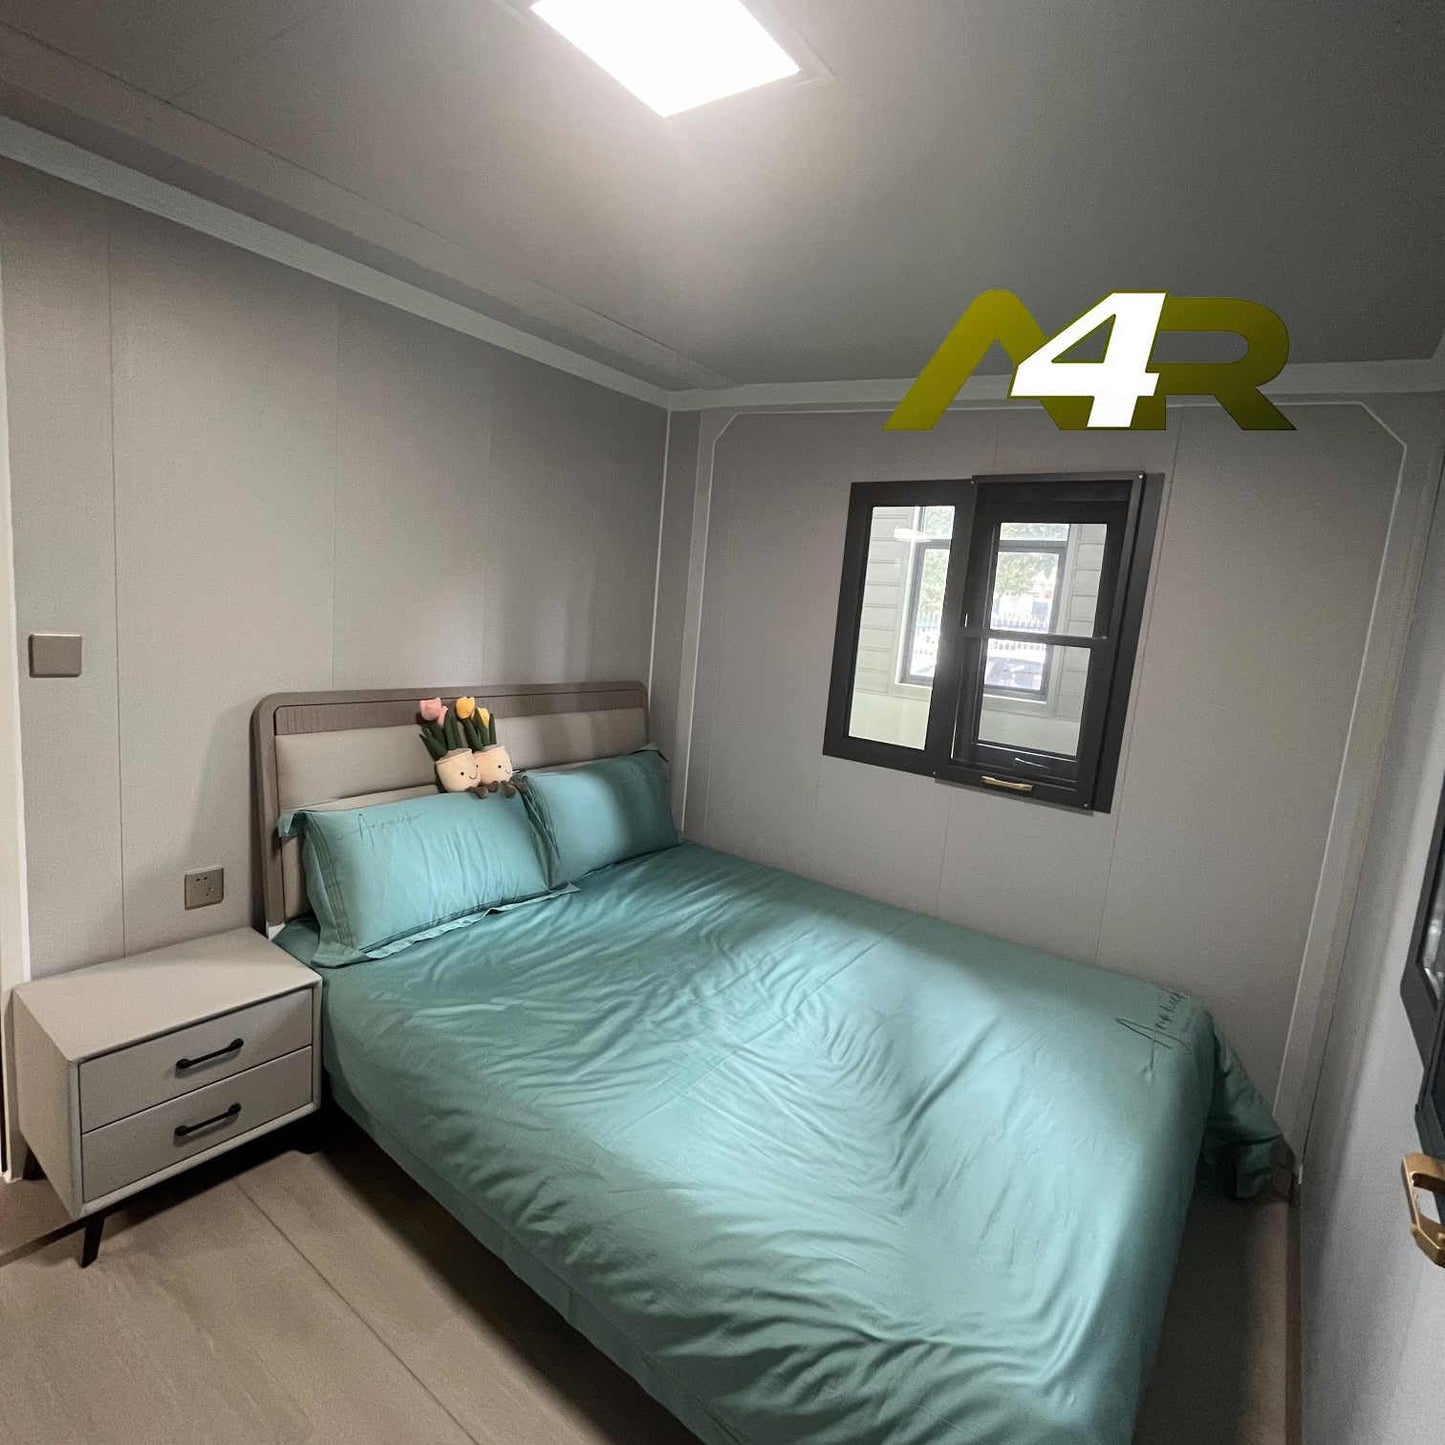 Portable Prefabricated Tiny Home 19 X 20ft Expandable House Container with 2 Bedroom, Bathroom, Lockable Door, Windows, Kitchen Cabinet, Sink and Light Switches